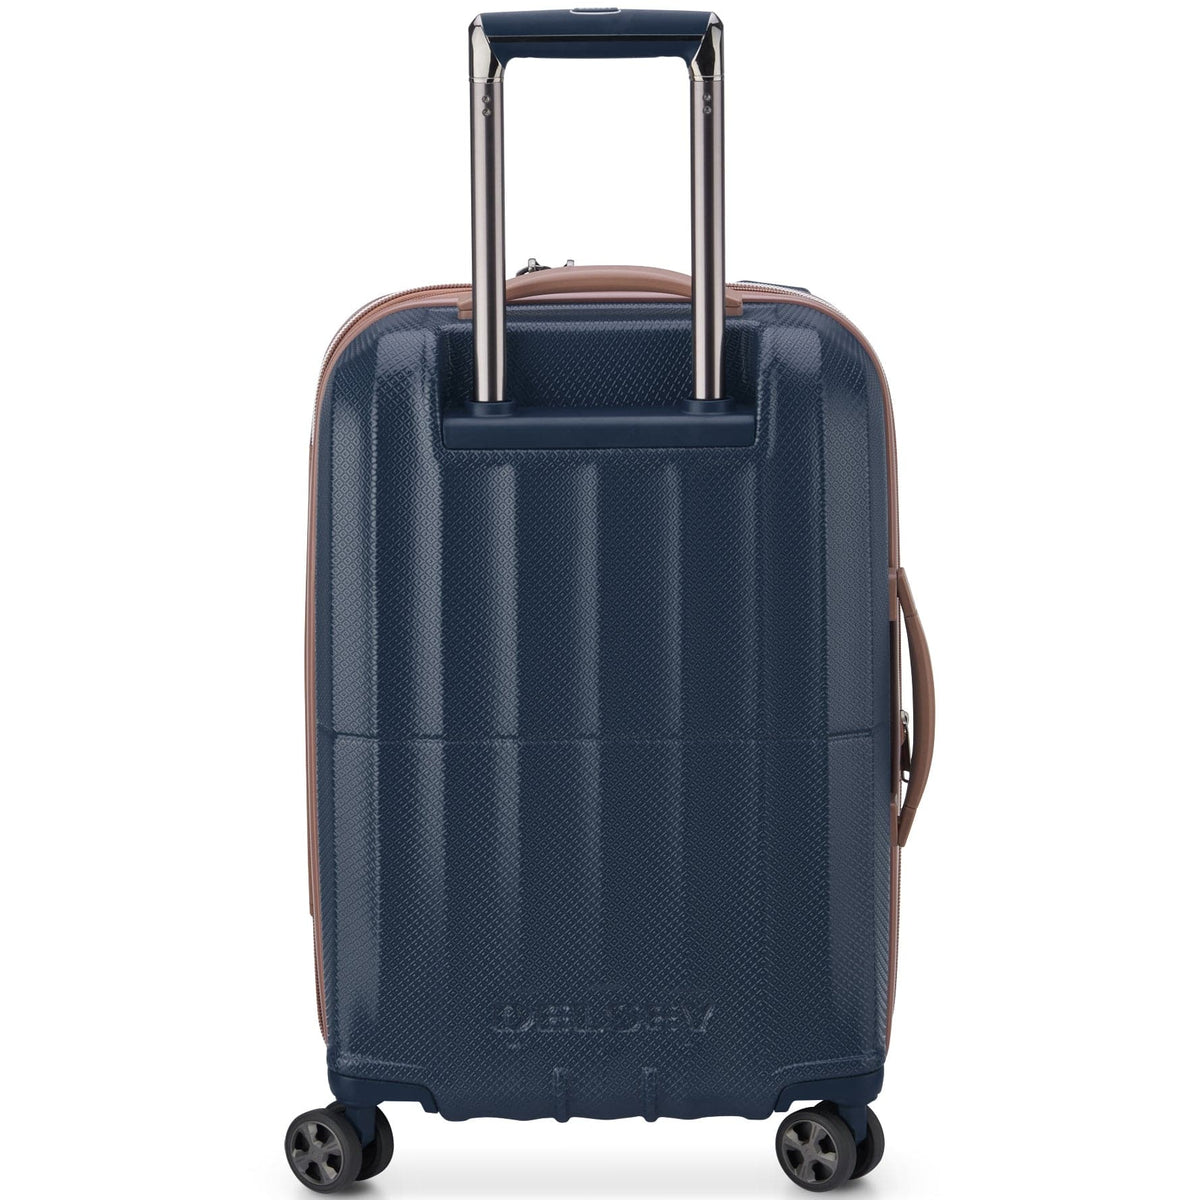 Delsey ST. Tropez Hardside Spinner Carry-On Luggage - 21" Small